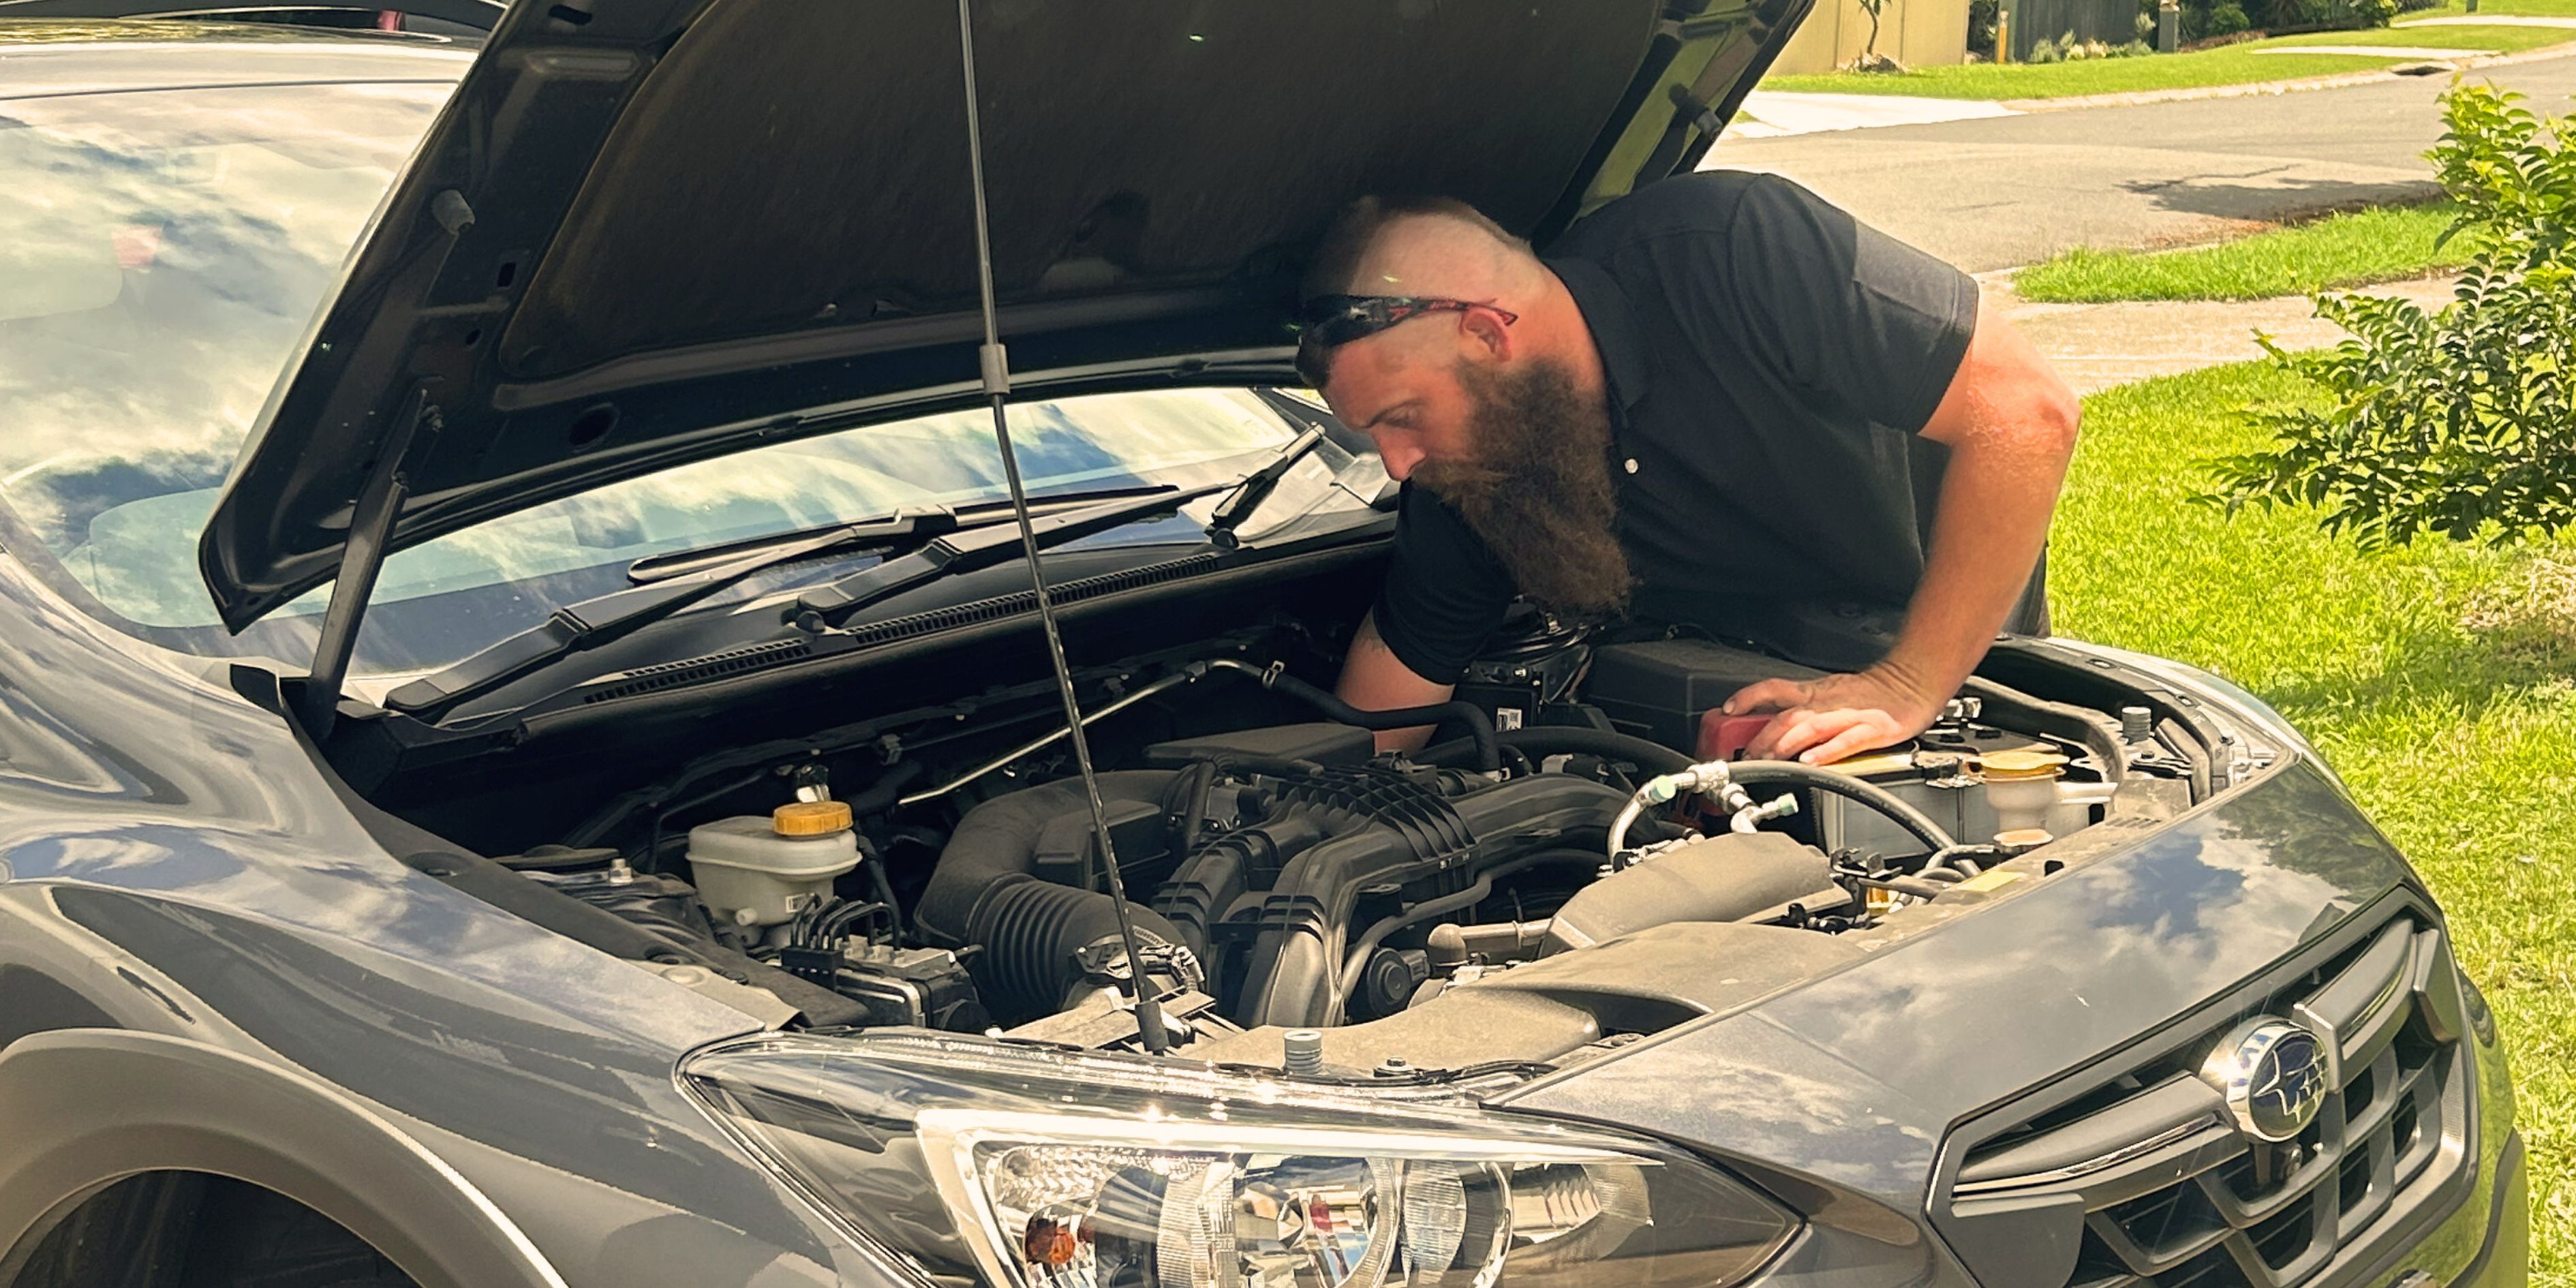 Friendly expert mobile mechanic with 20+ years' experience servicing South East Queensland and surrounds with Log Book Services, General Services, Inspections, Repairs, and more.